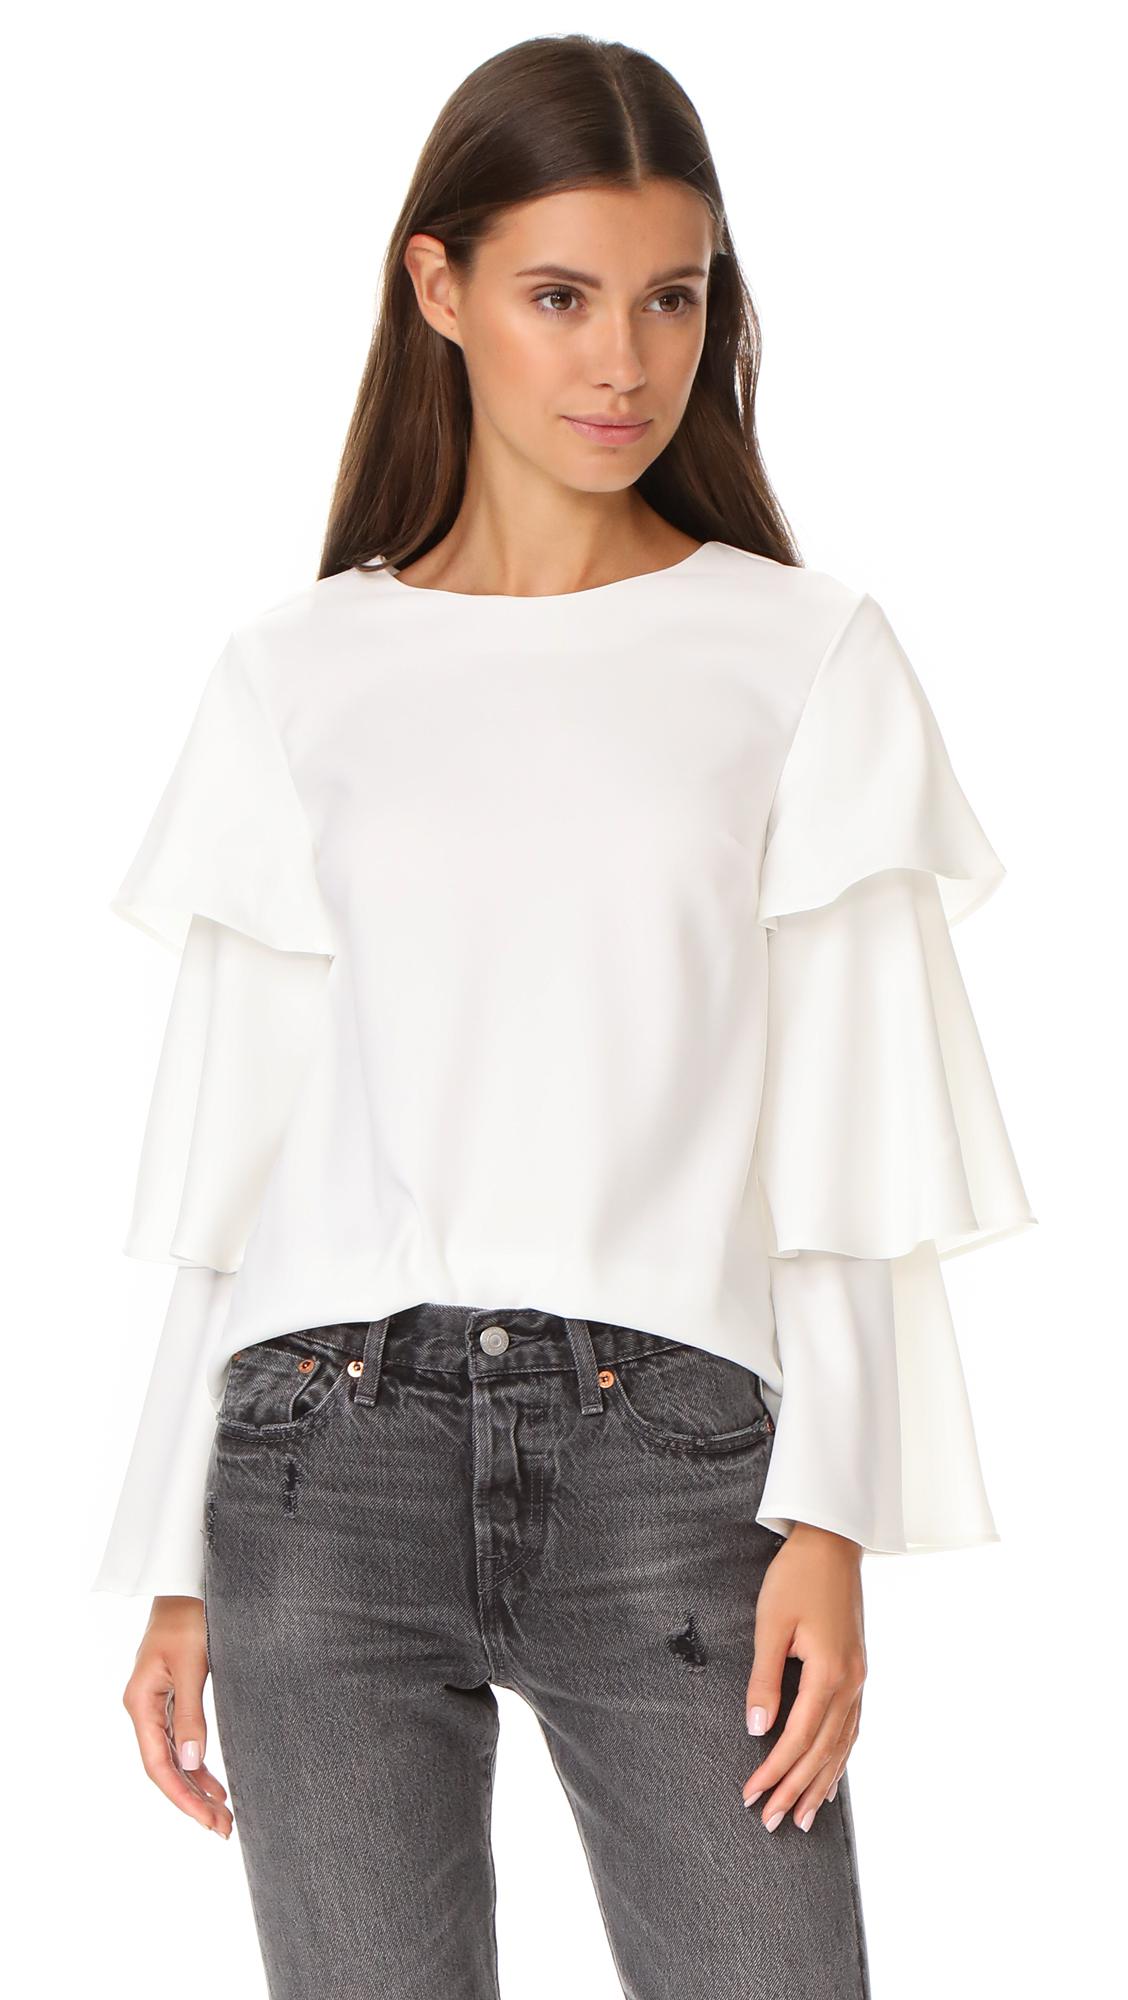 Lyst - English Factory Ruffle Accent Blouse in White